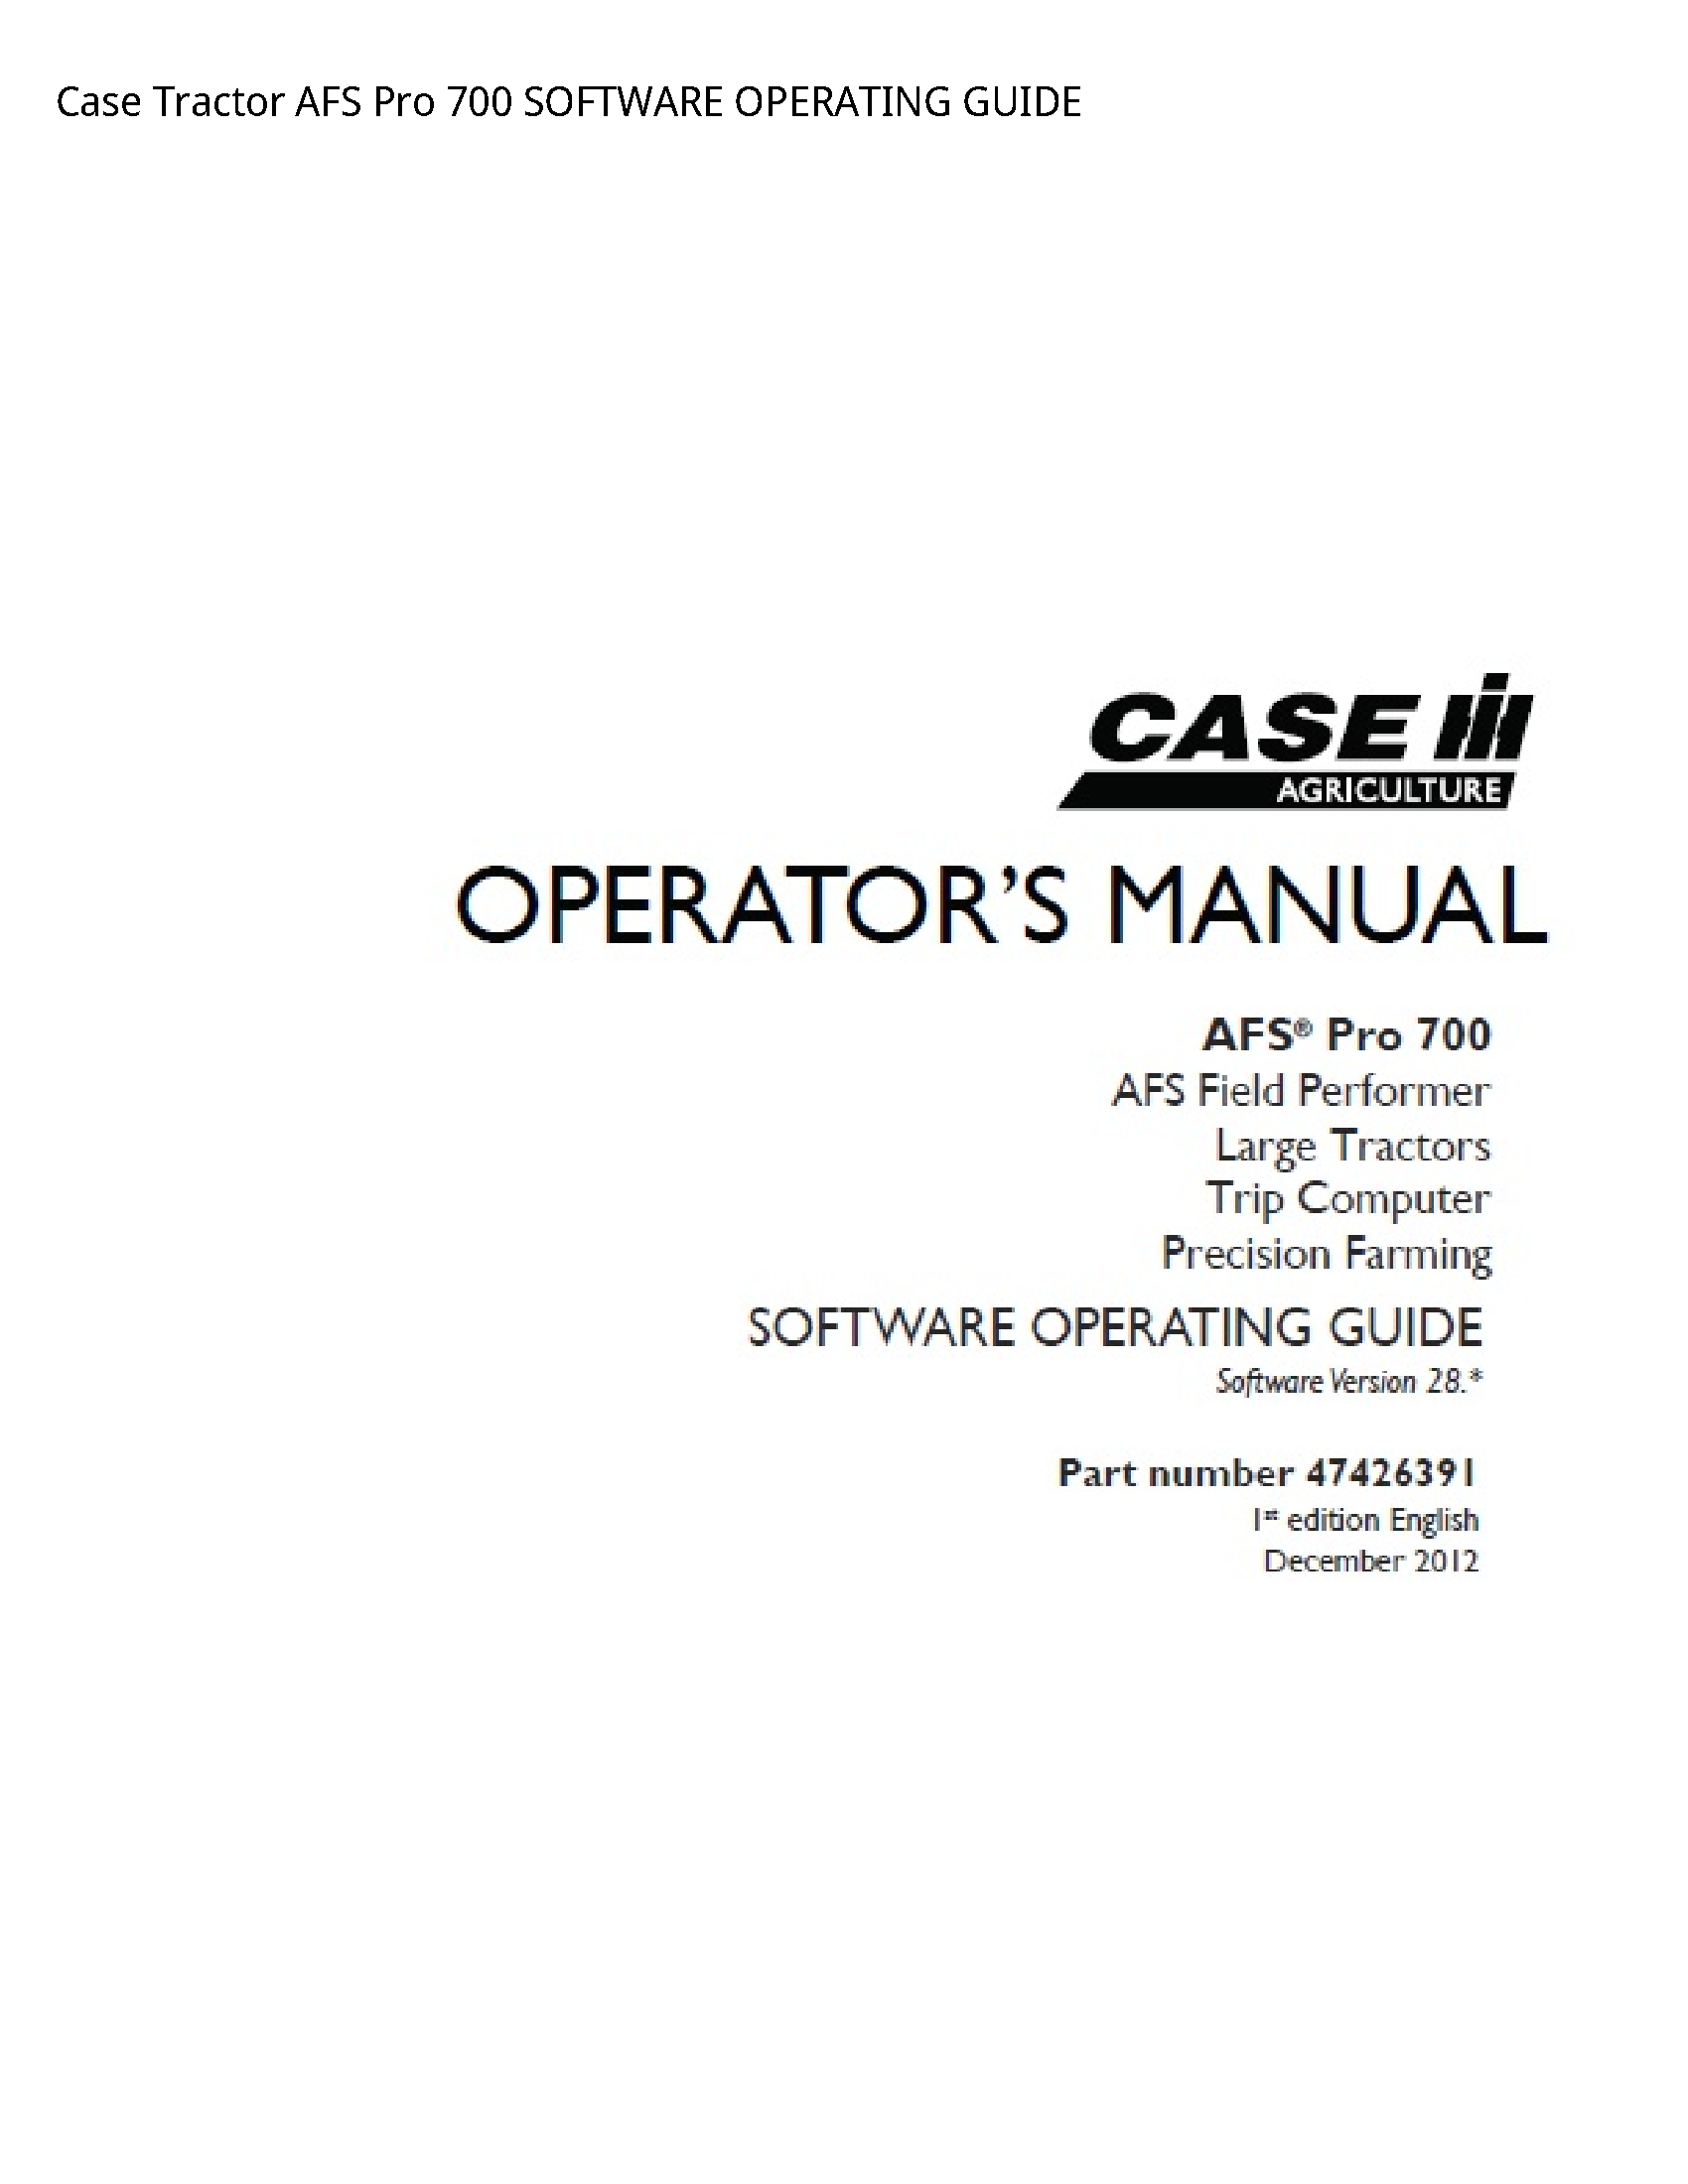 Case/Case IH 700 Tractor AFS Pro SOFTWARE GUIDE manual